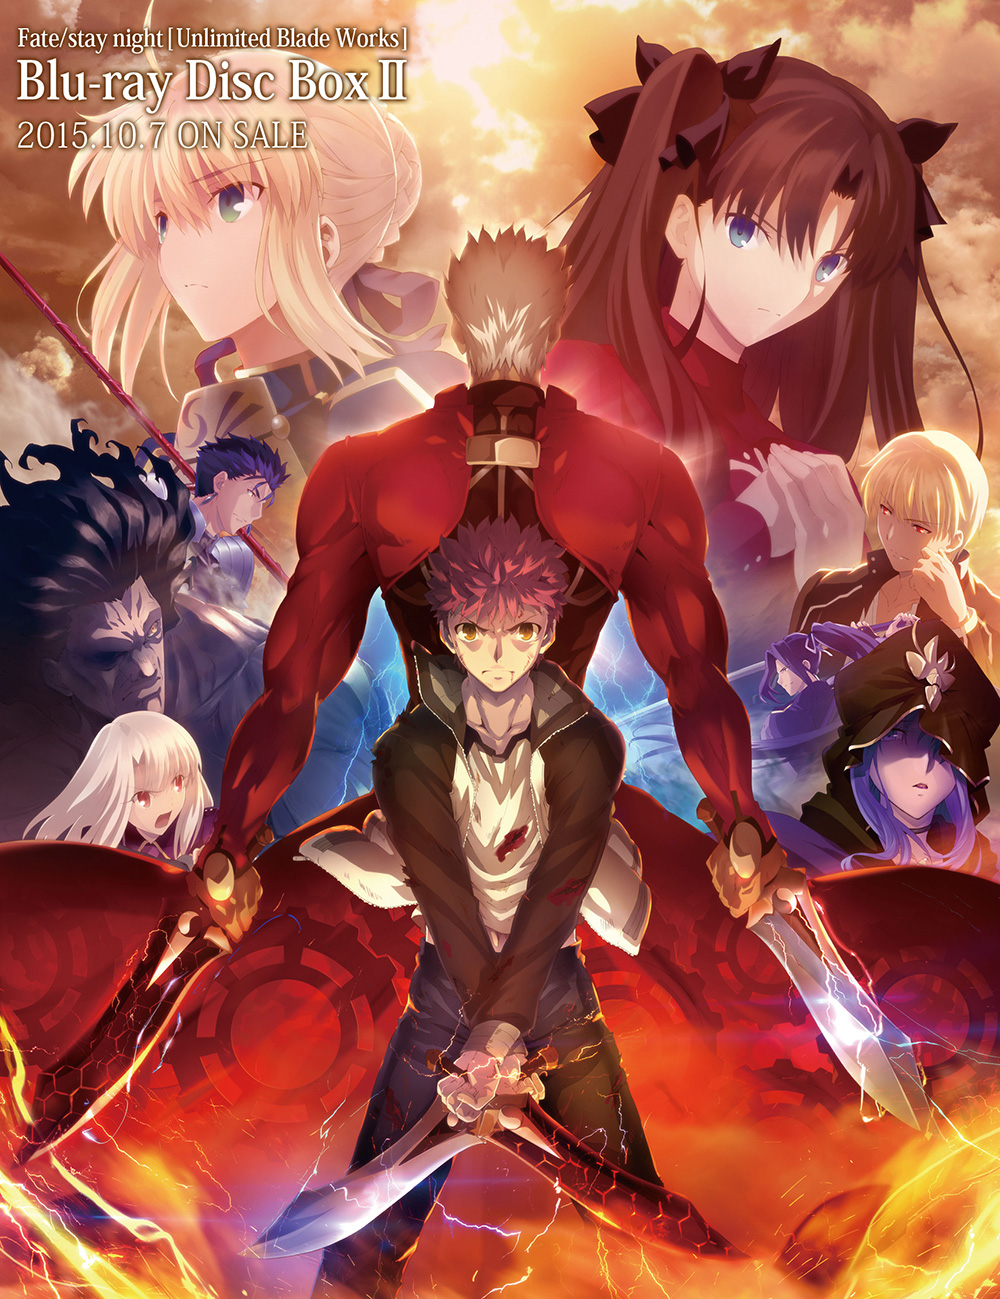 Fate-stay-night-Unlimited-Blade-Works-Blu-ray-2-Visual